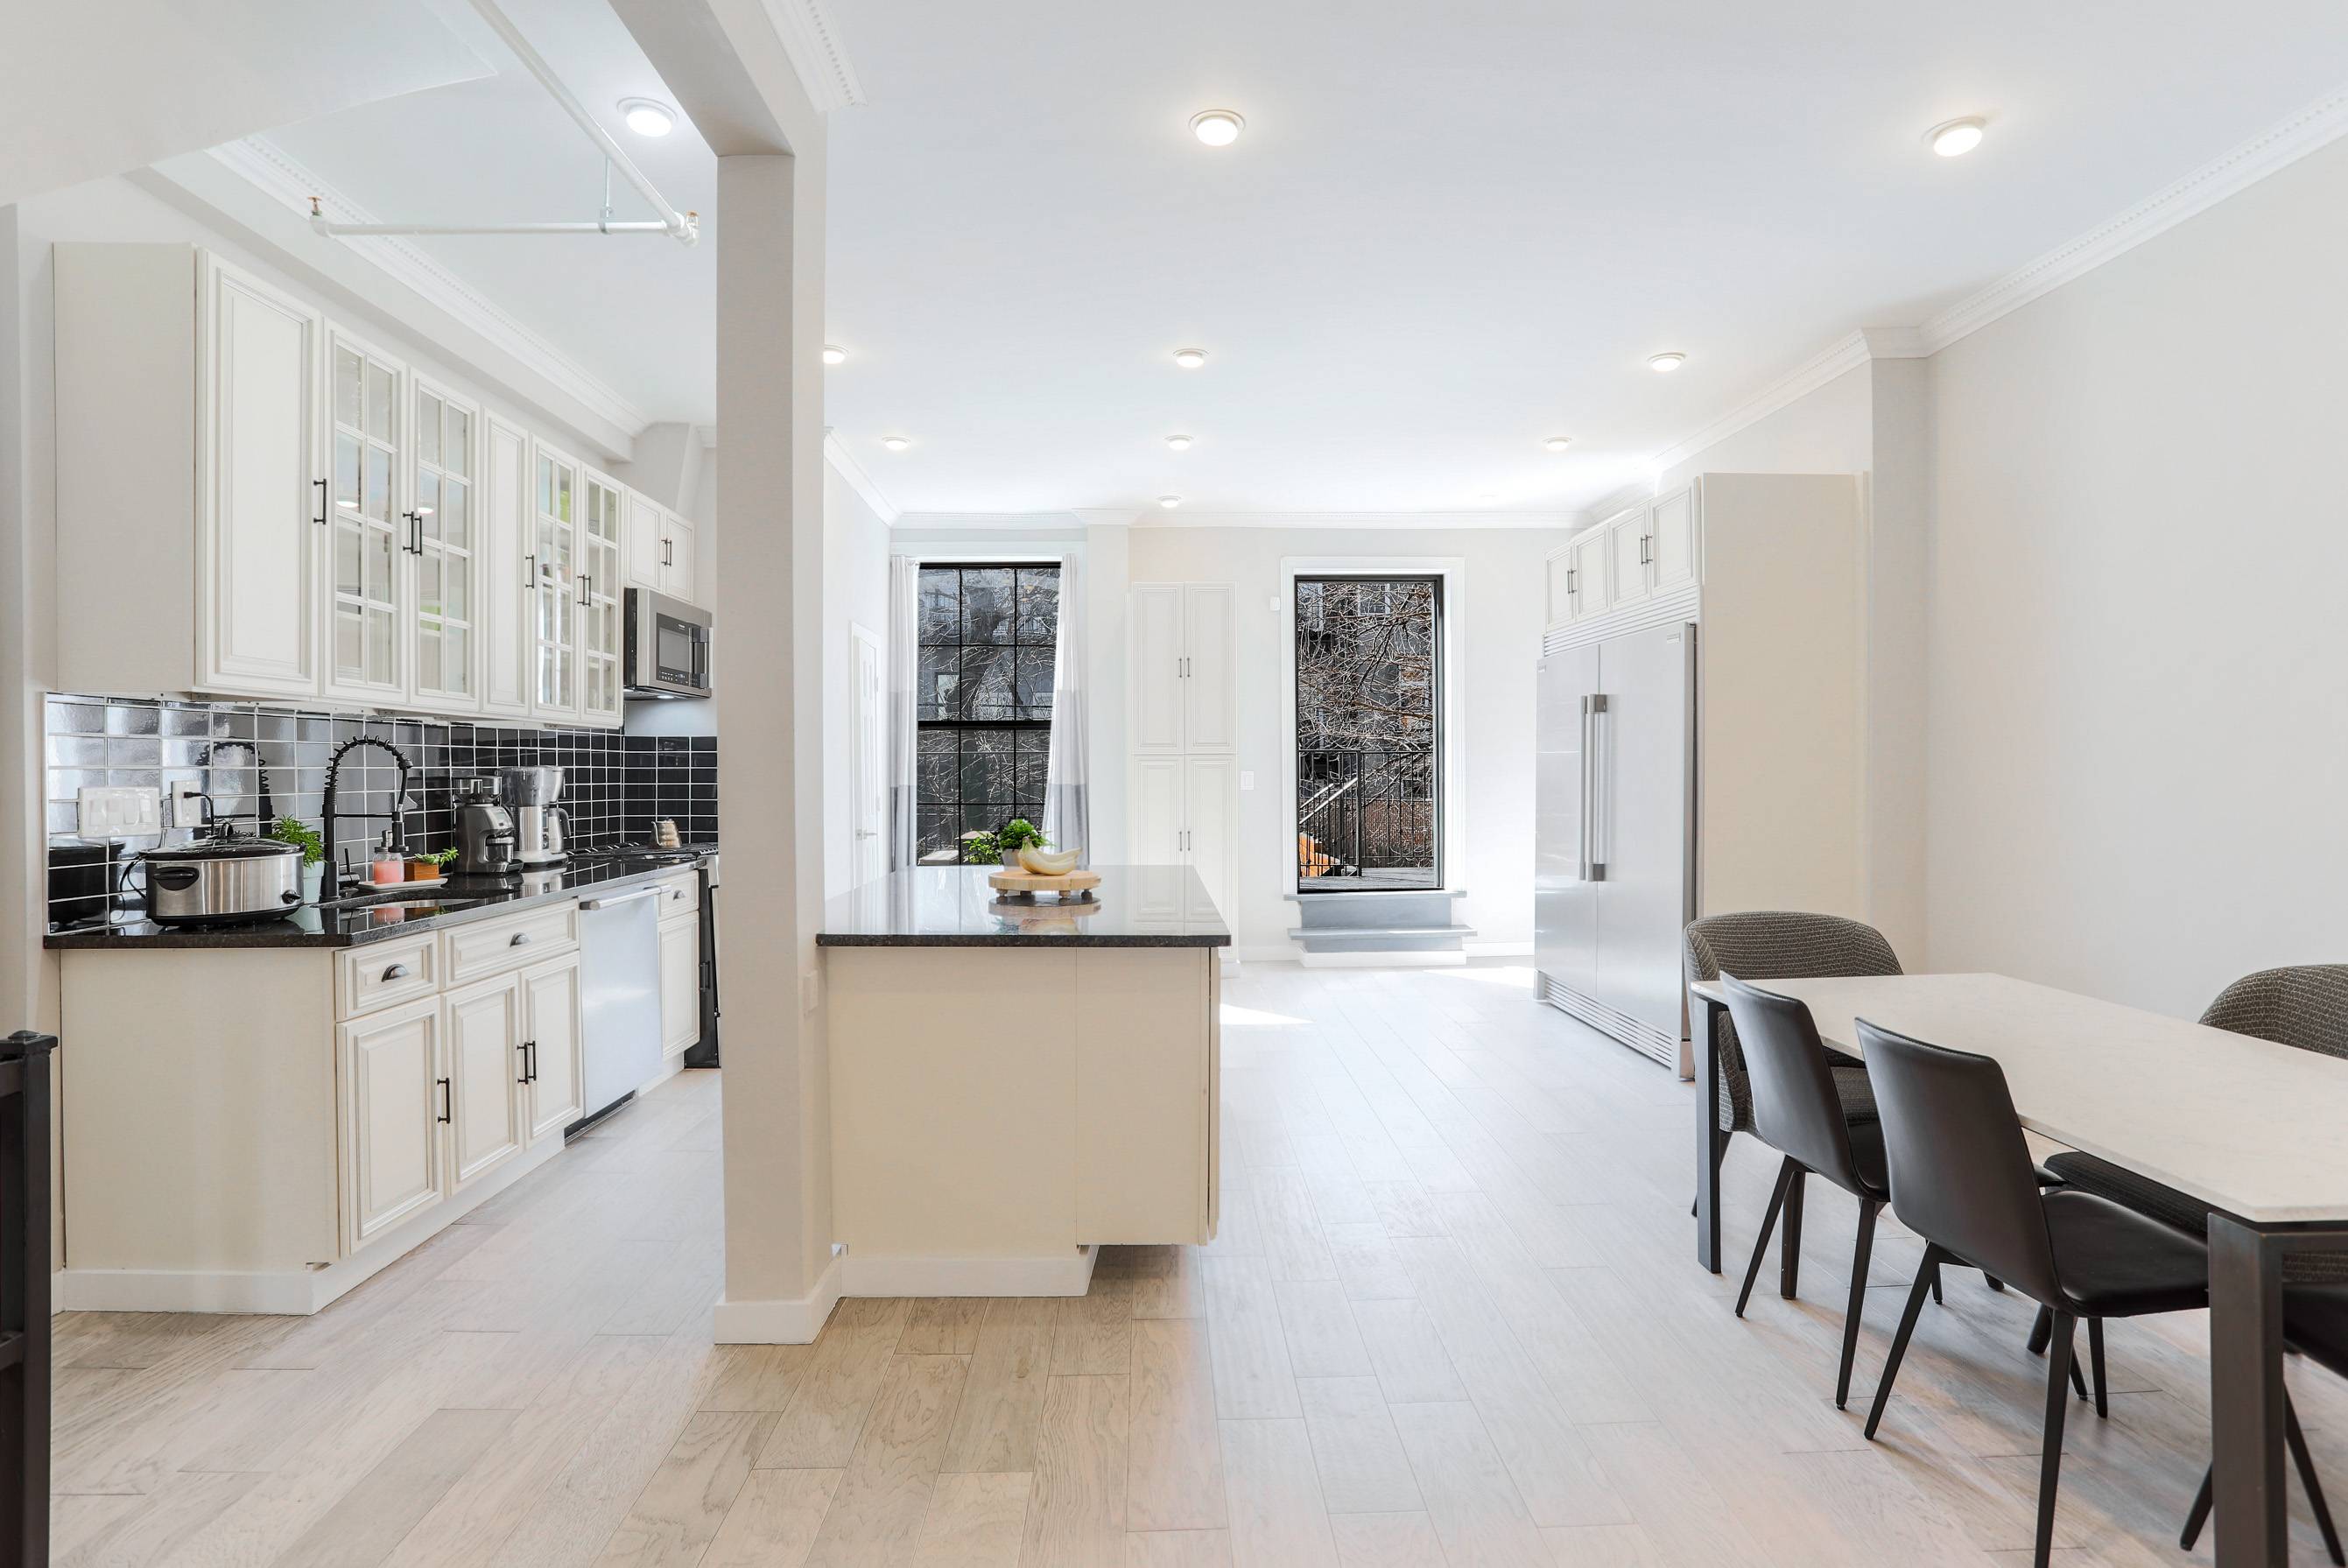 20' Wide Brownstone New Conversion With Modern Style Renovation Three Family Clinton Hill/Bed-Stuy